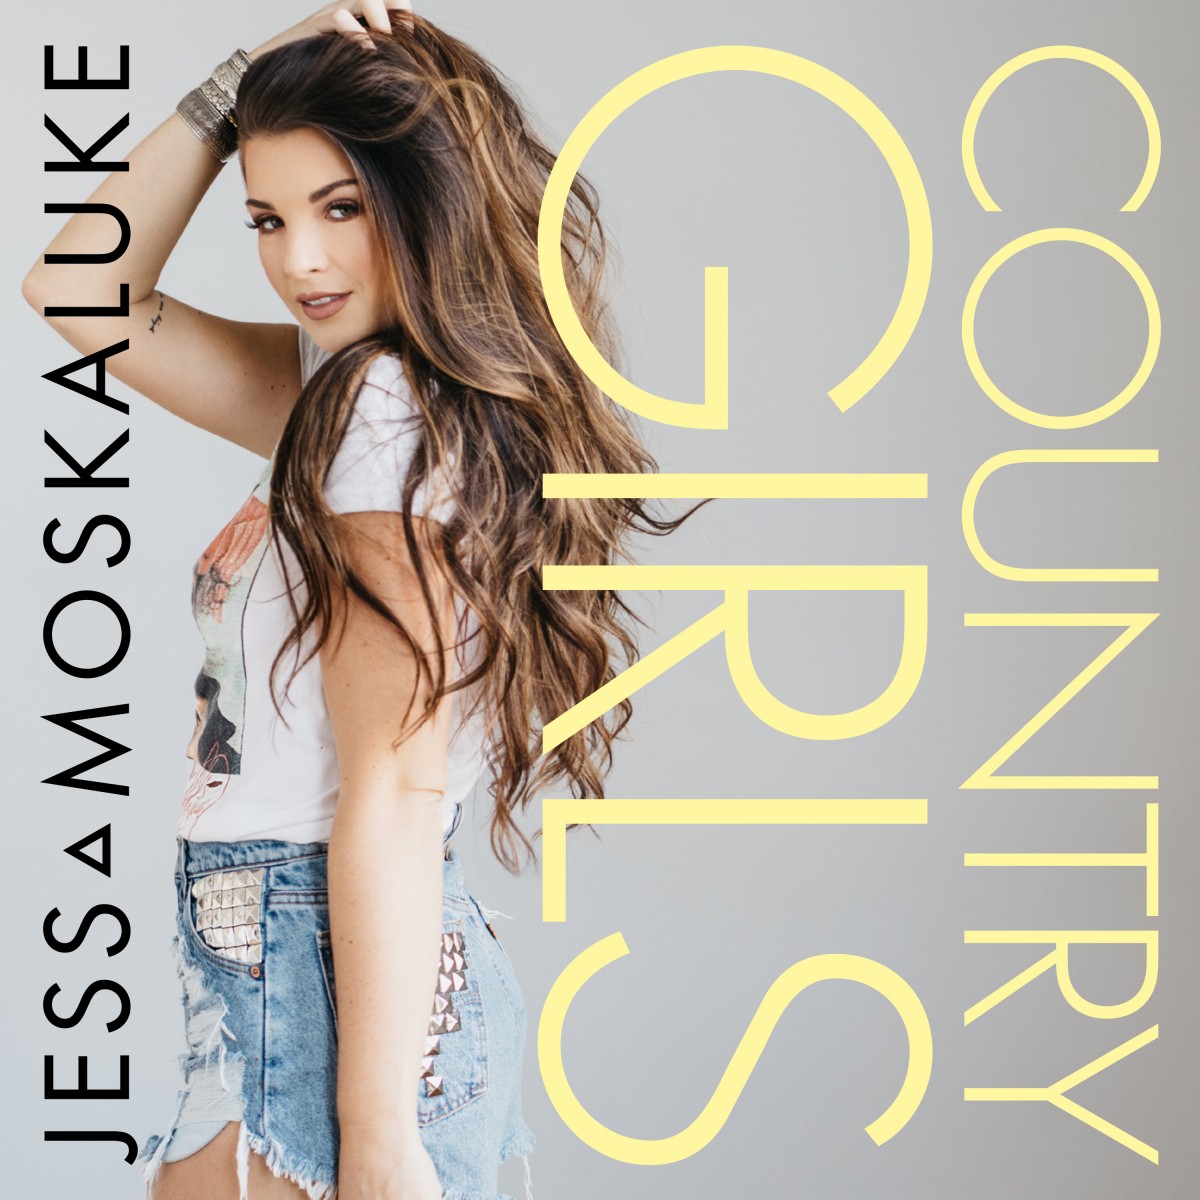 Platinum Selling, Award Winning Country Star Jess Moskaluke Drops “Country Girls”, Her New Single Available Today